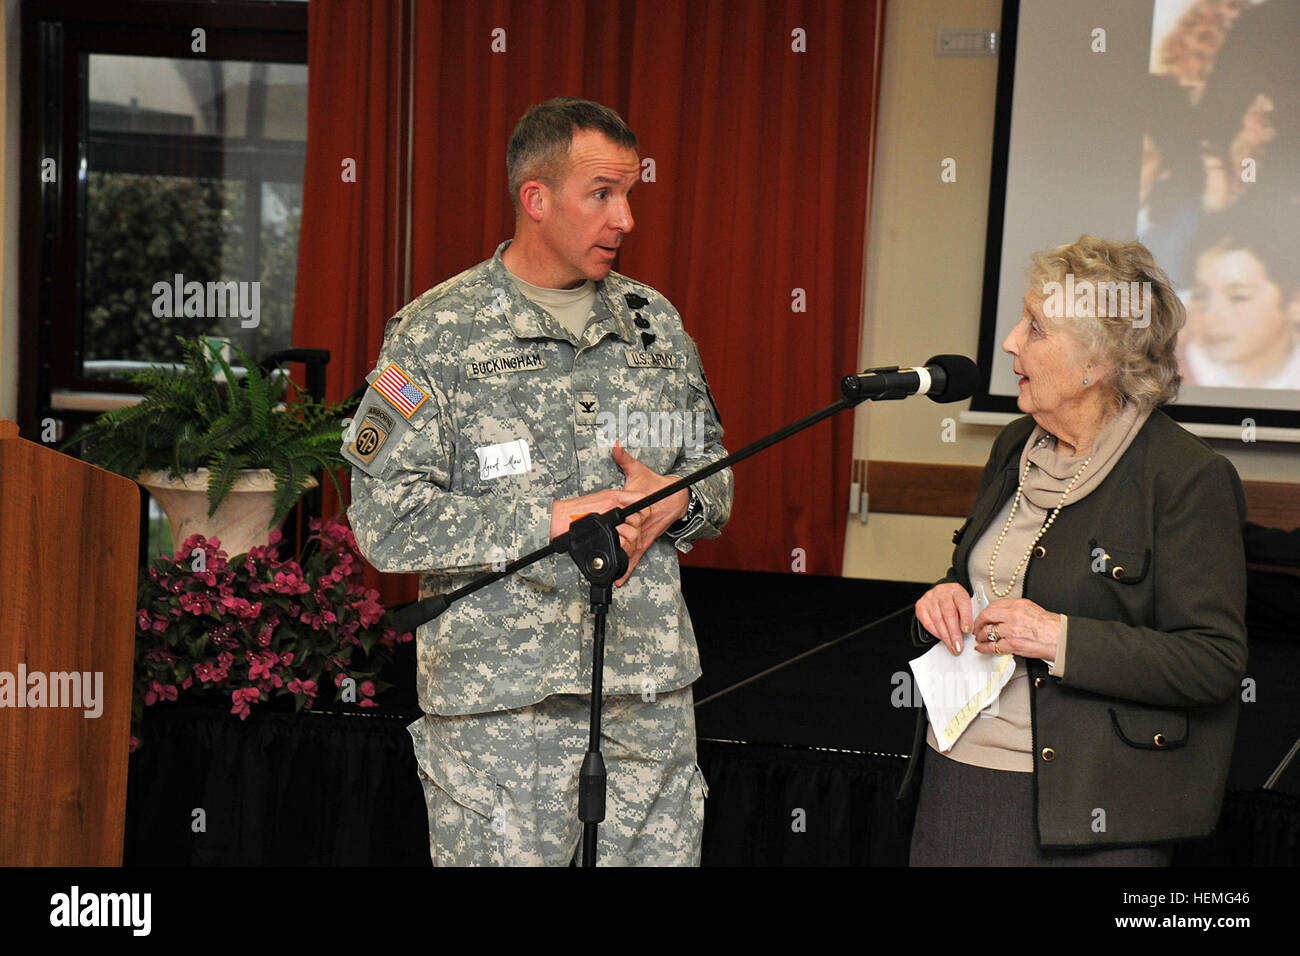 Col. David W. Buckingham, Commander U.S. Army Garrison Vicenza, thanks Noreen Riols for her speech during the Women's History Month on March 28, 2013 in Caserma  Ederle Vicenza,  Italy.' (U.S. Army photo by Paolo Bovo JM436 7 JMTC Vicenza - Italy/Released Noreen Riols, World War II British spy 130328-A-JM436-031 Stock Photo